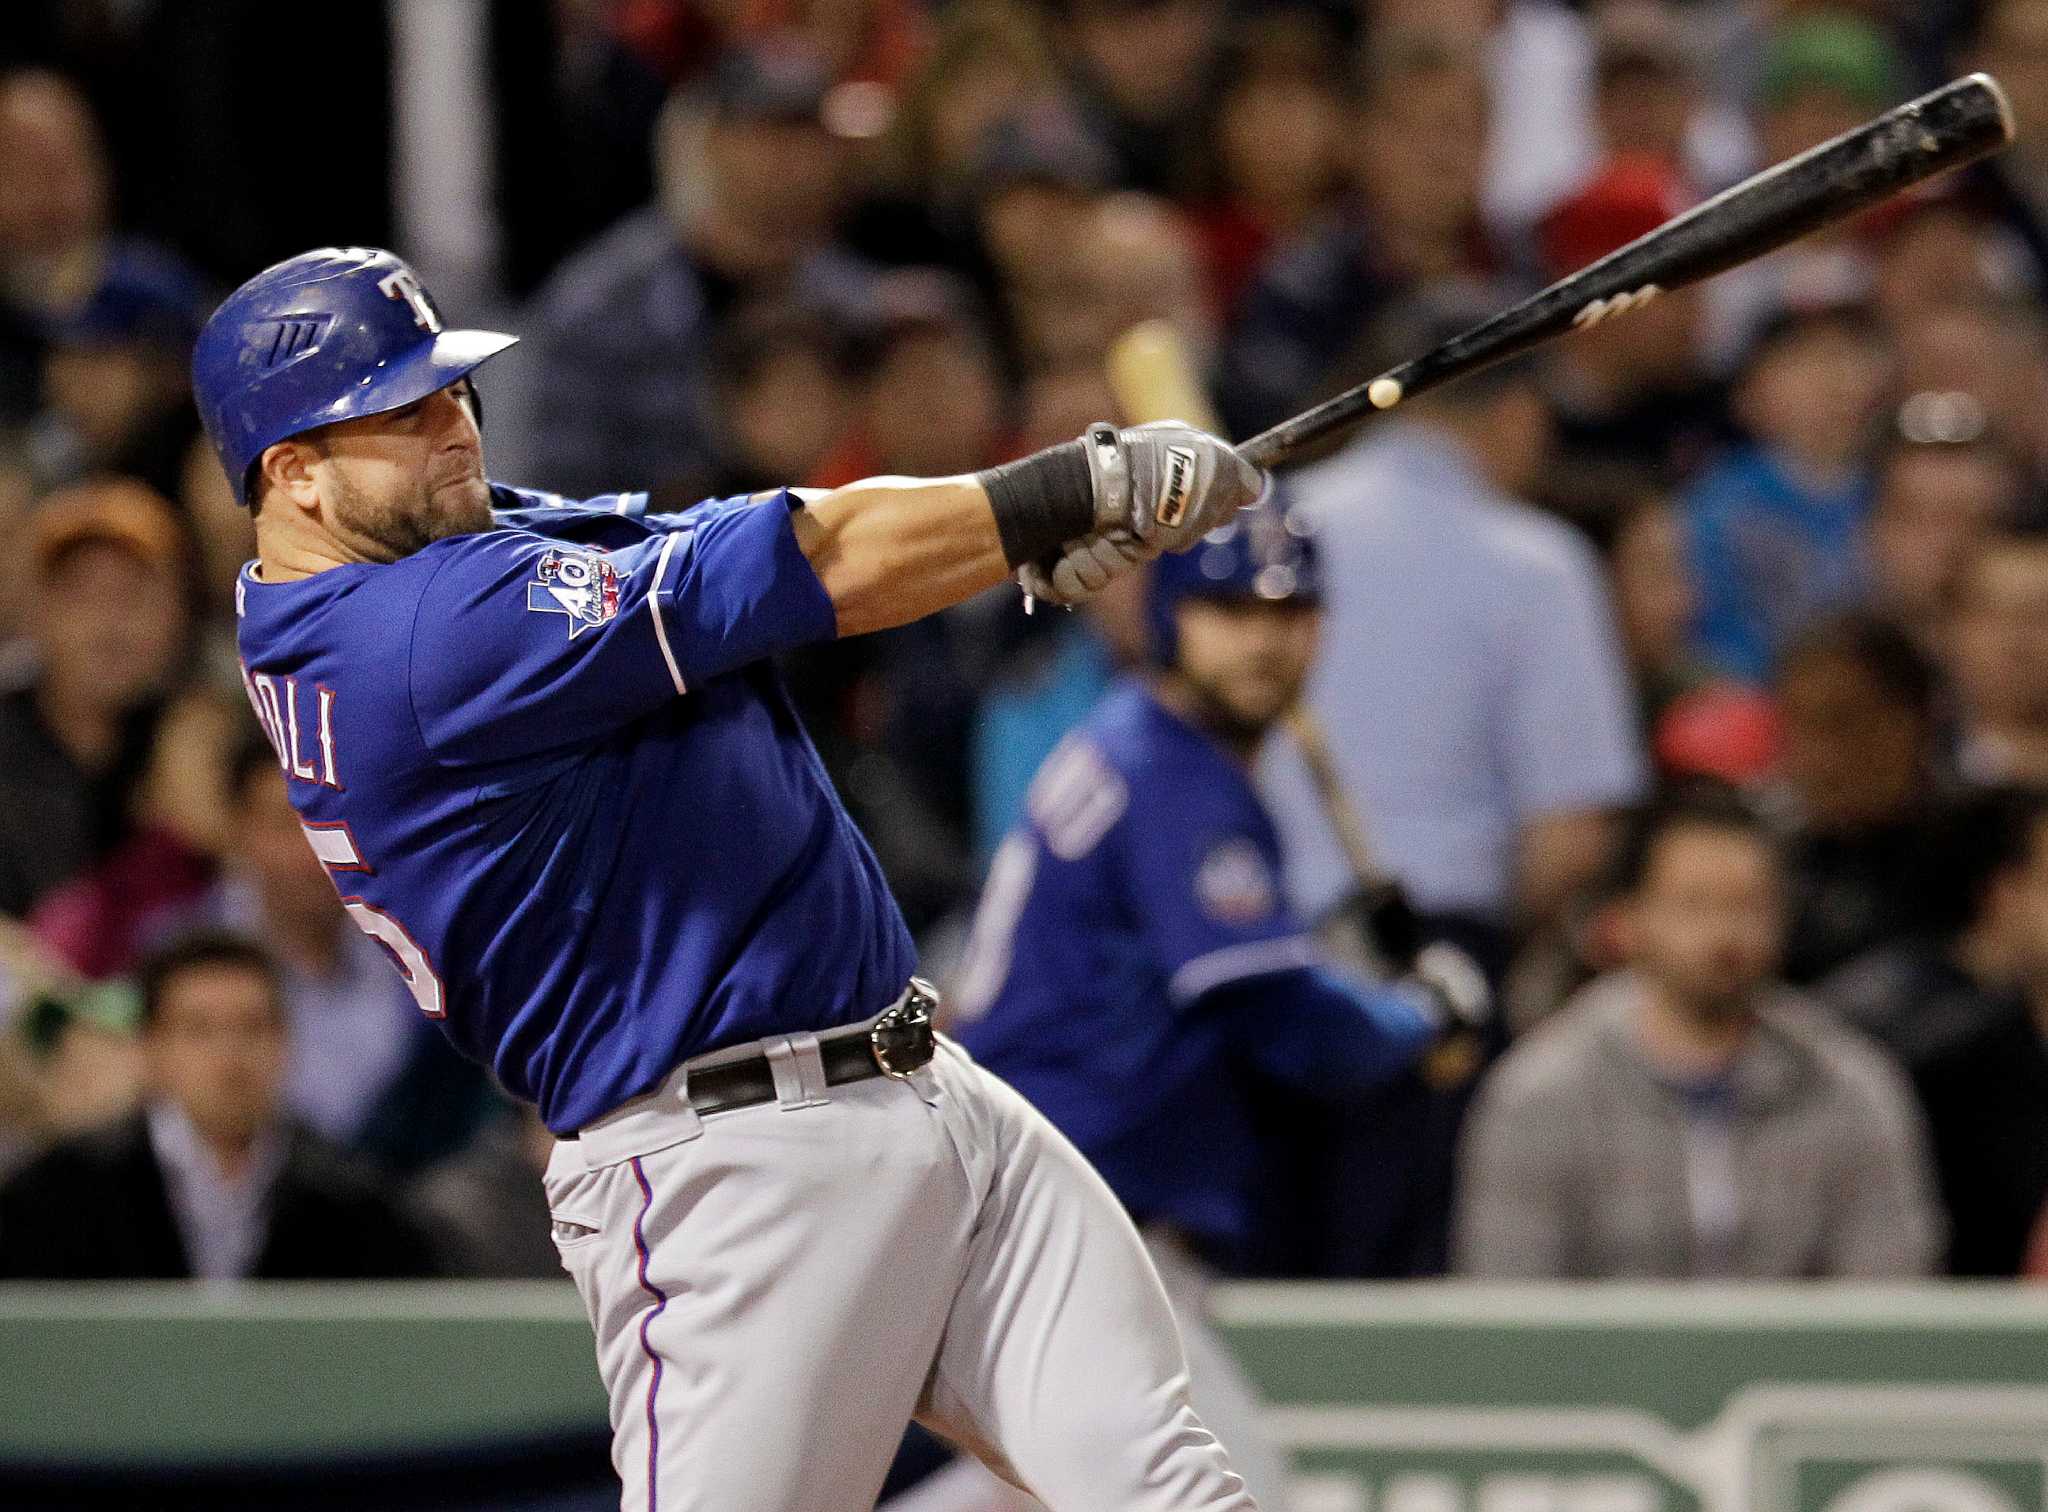 Inside pitch: Napoli carries red-hot Rangers to sweep of Red Sox